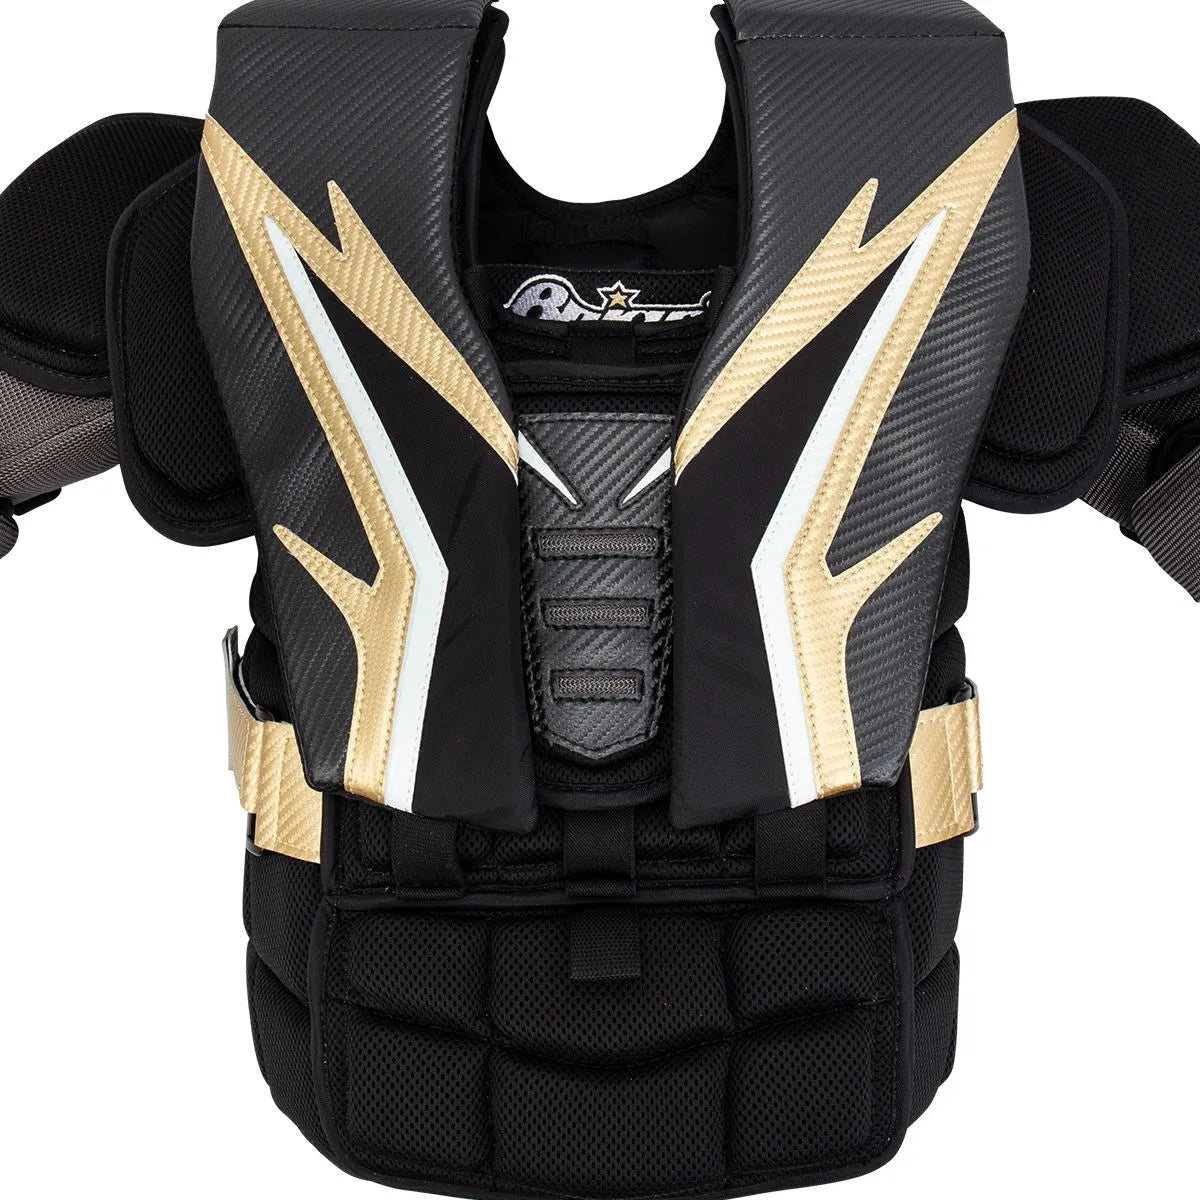 Brian's B Star 2 Junior Goalie Chest Protector Close up